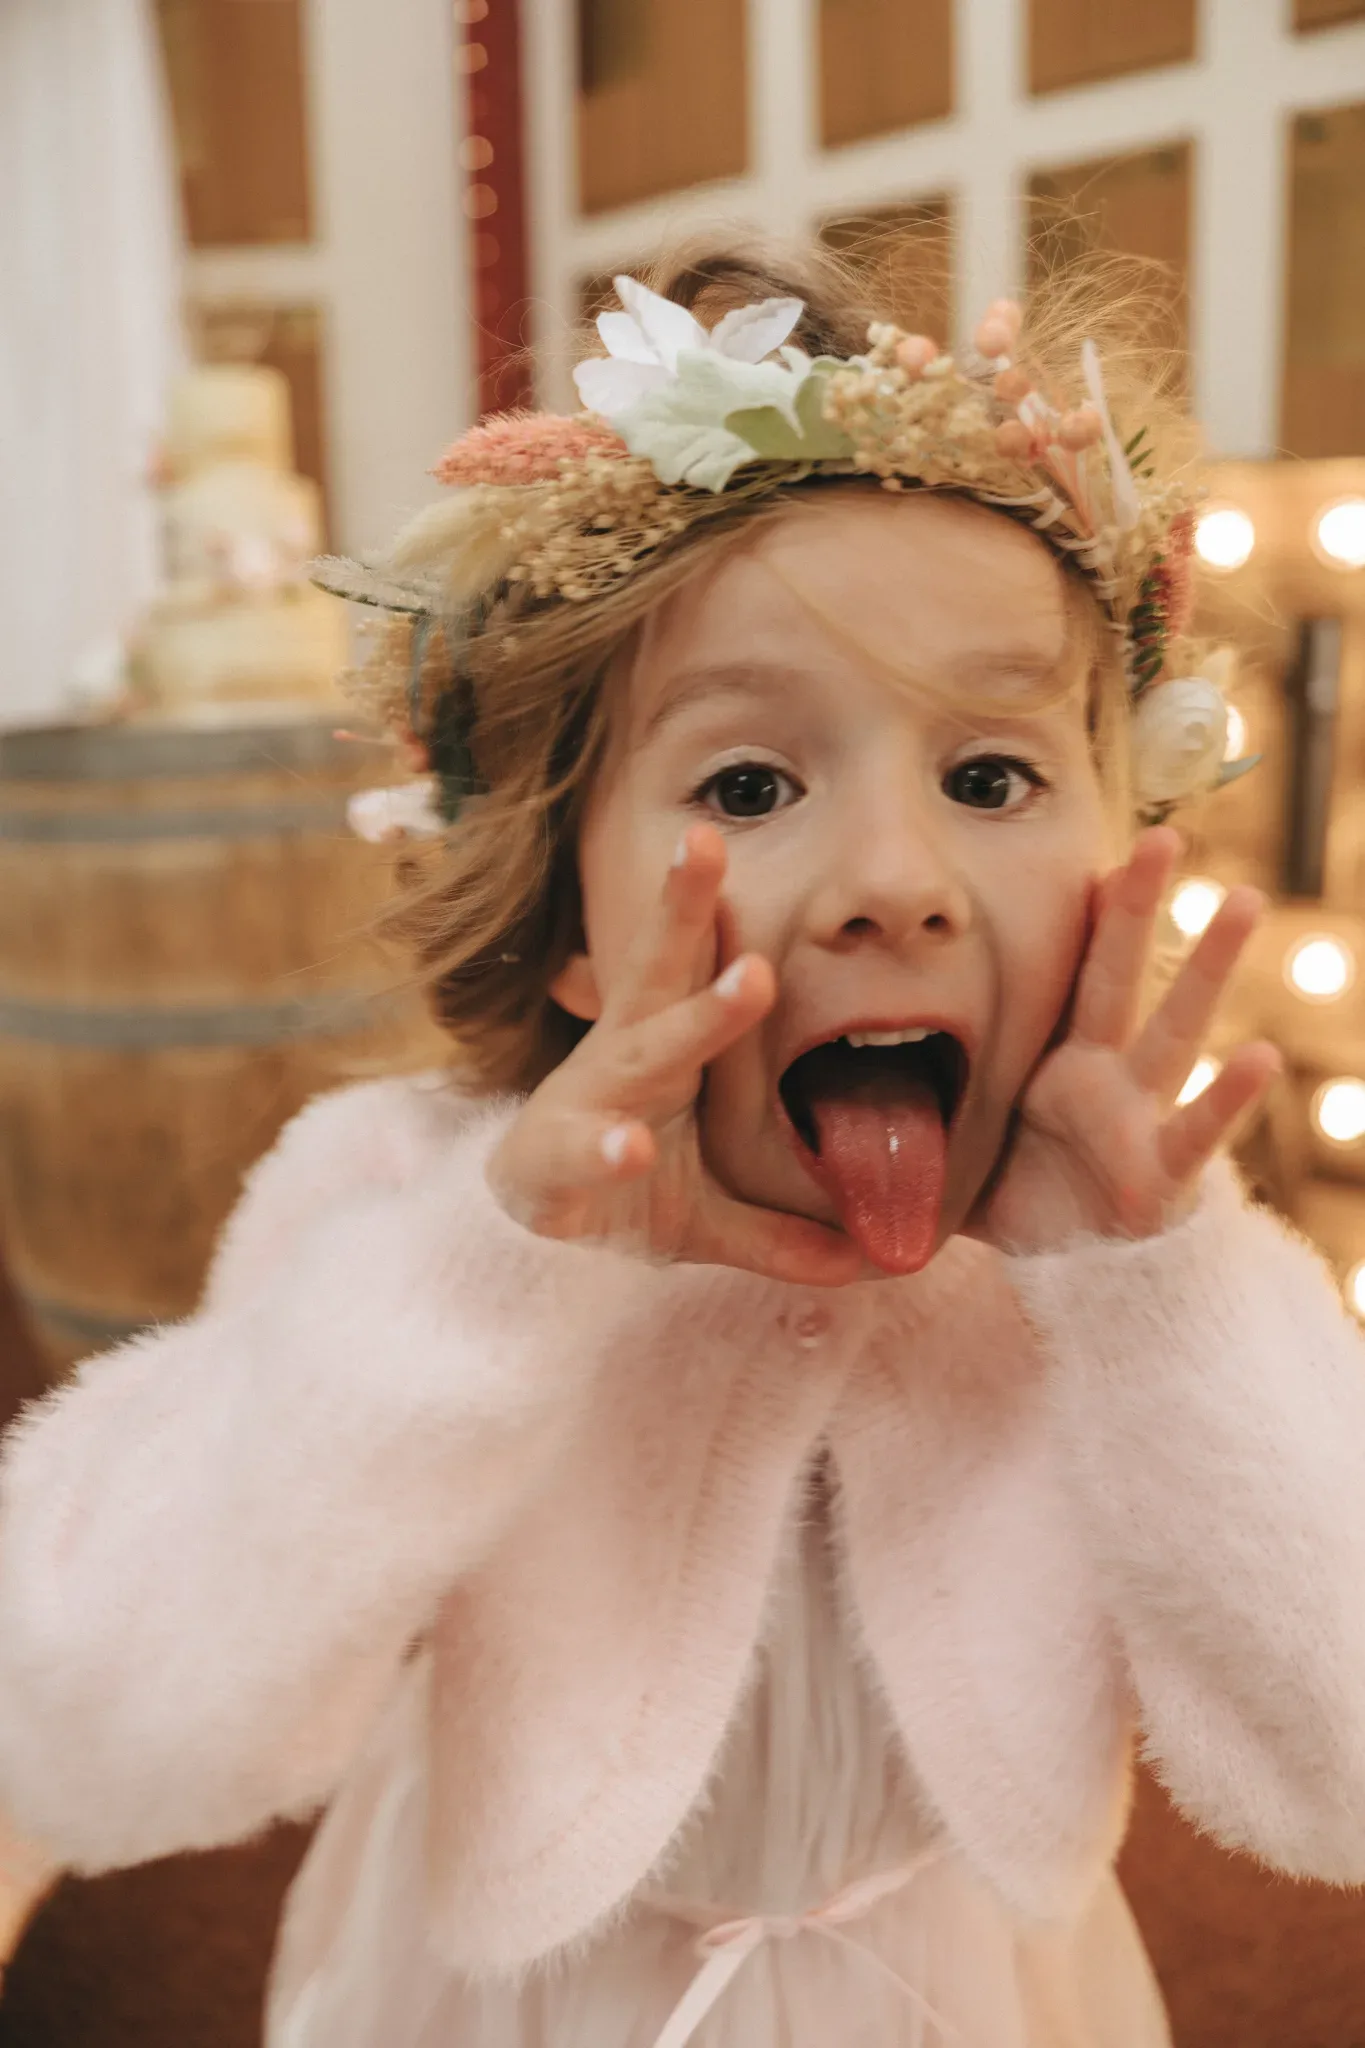 A young girl with a flower crown pulls a playful face by stretching her mouth with her fingers and sticking out her tongue. she wears a fluffy, light pink coat and stands indoors with warm lighting in the background.